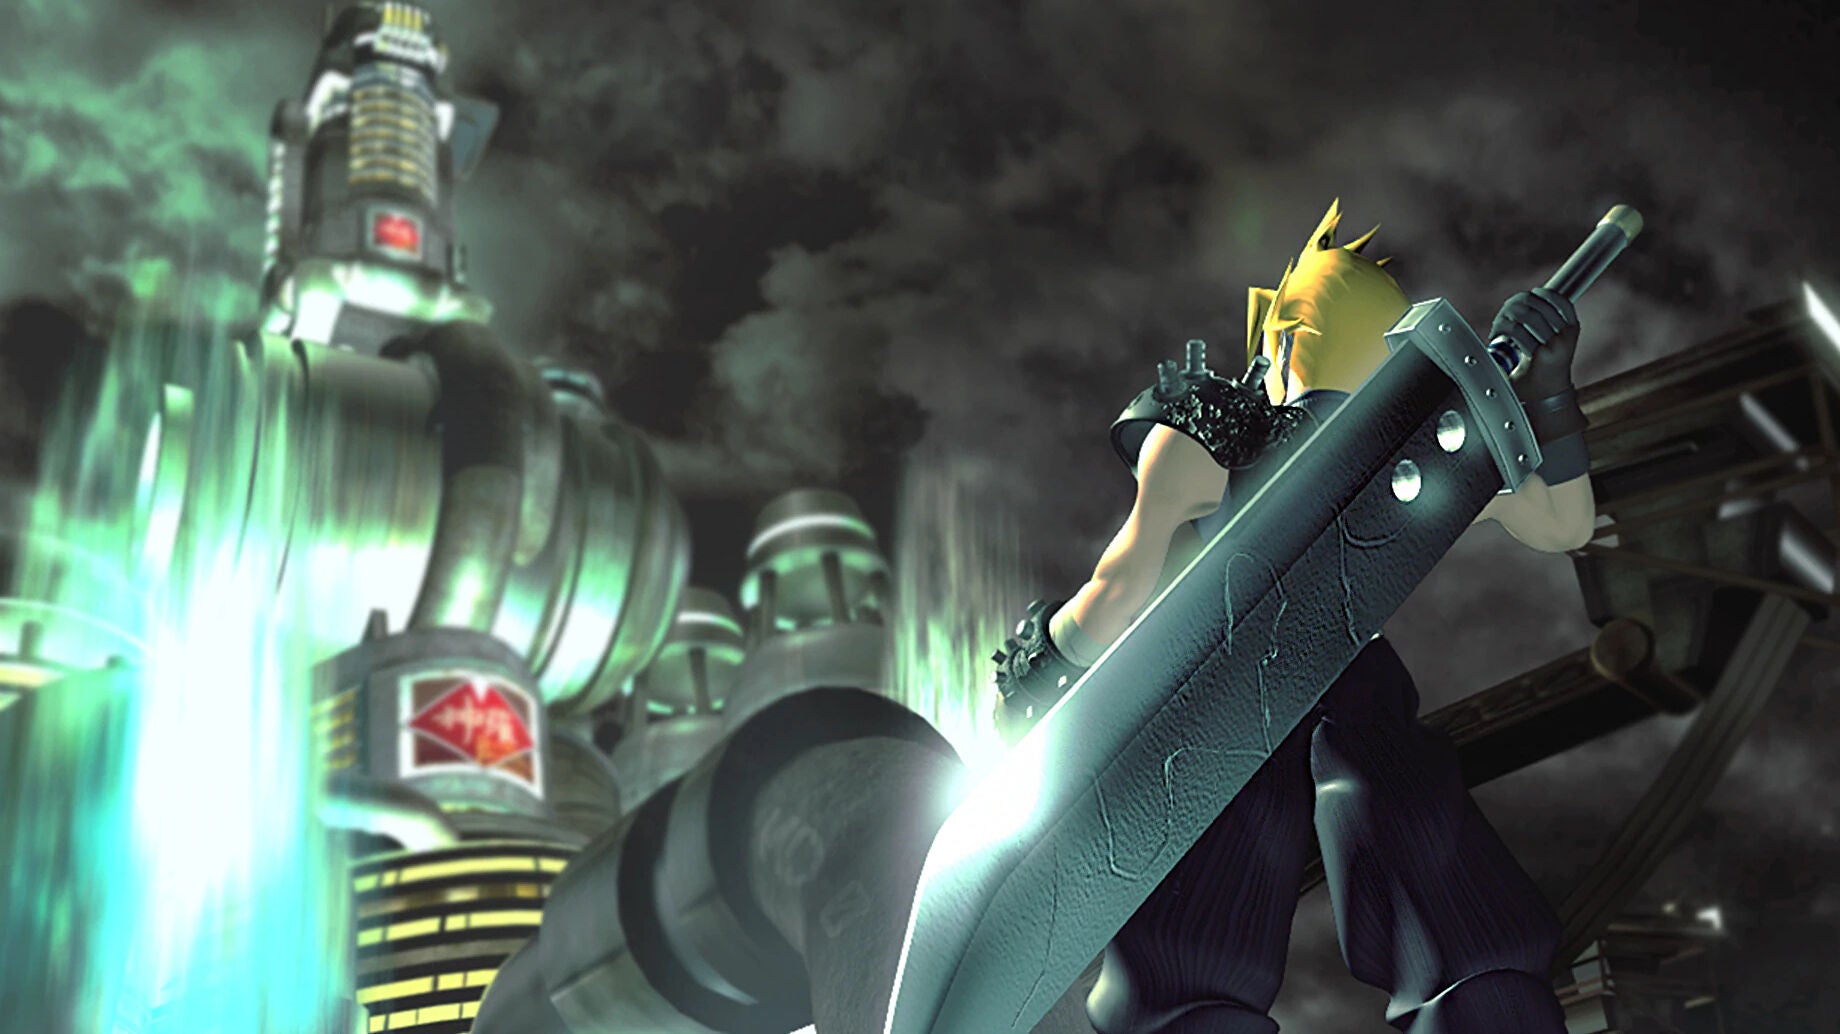 Final Fantasy 7 opening image of Cloud